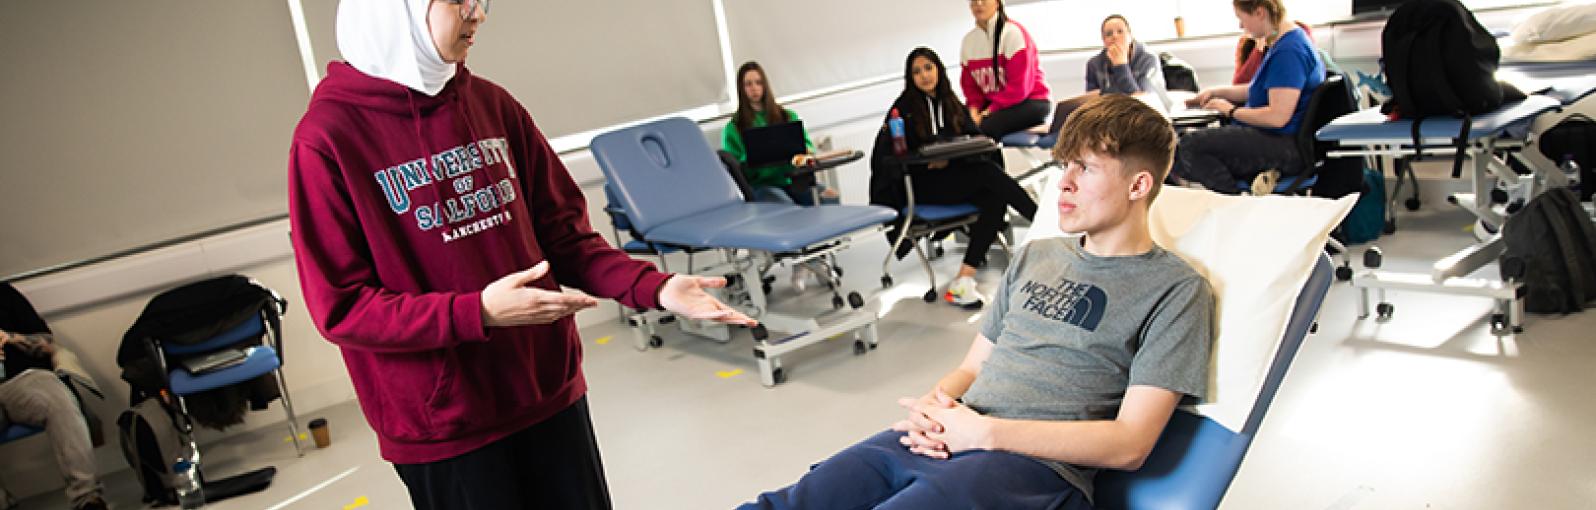 Group of Physiotherapy students engaging in a practical session and using a plynth room to examine each other at the University of Salford 